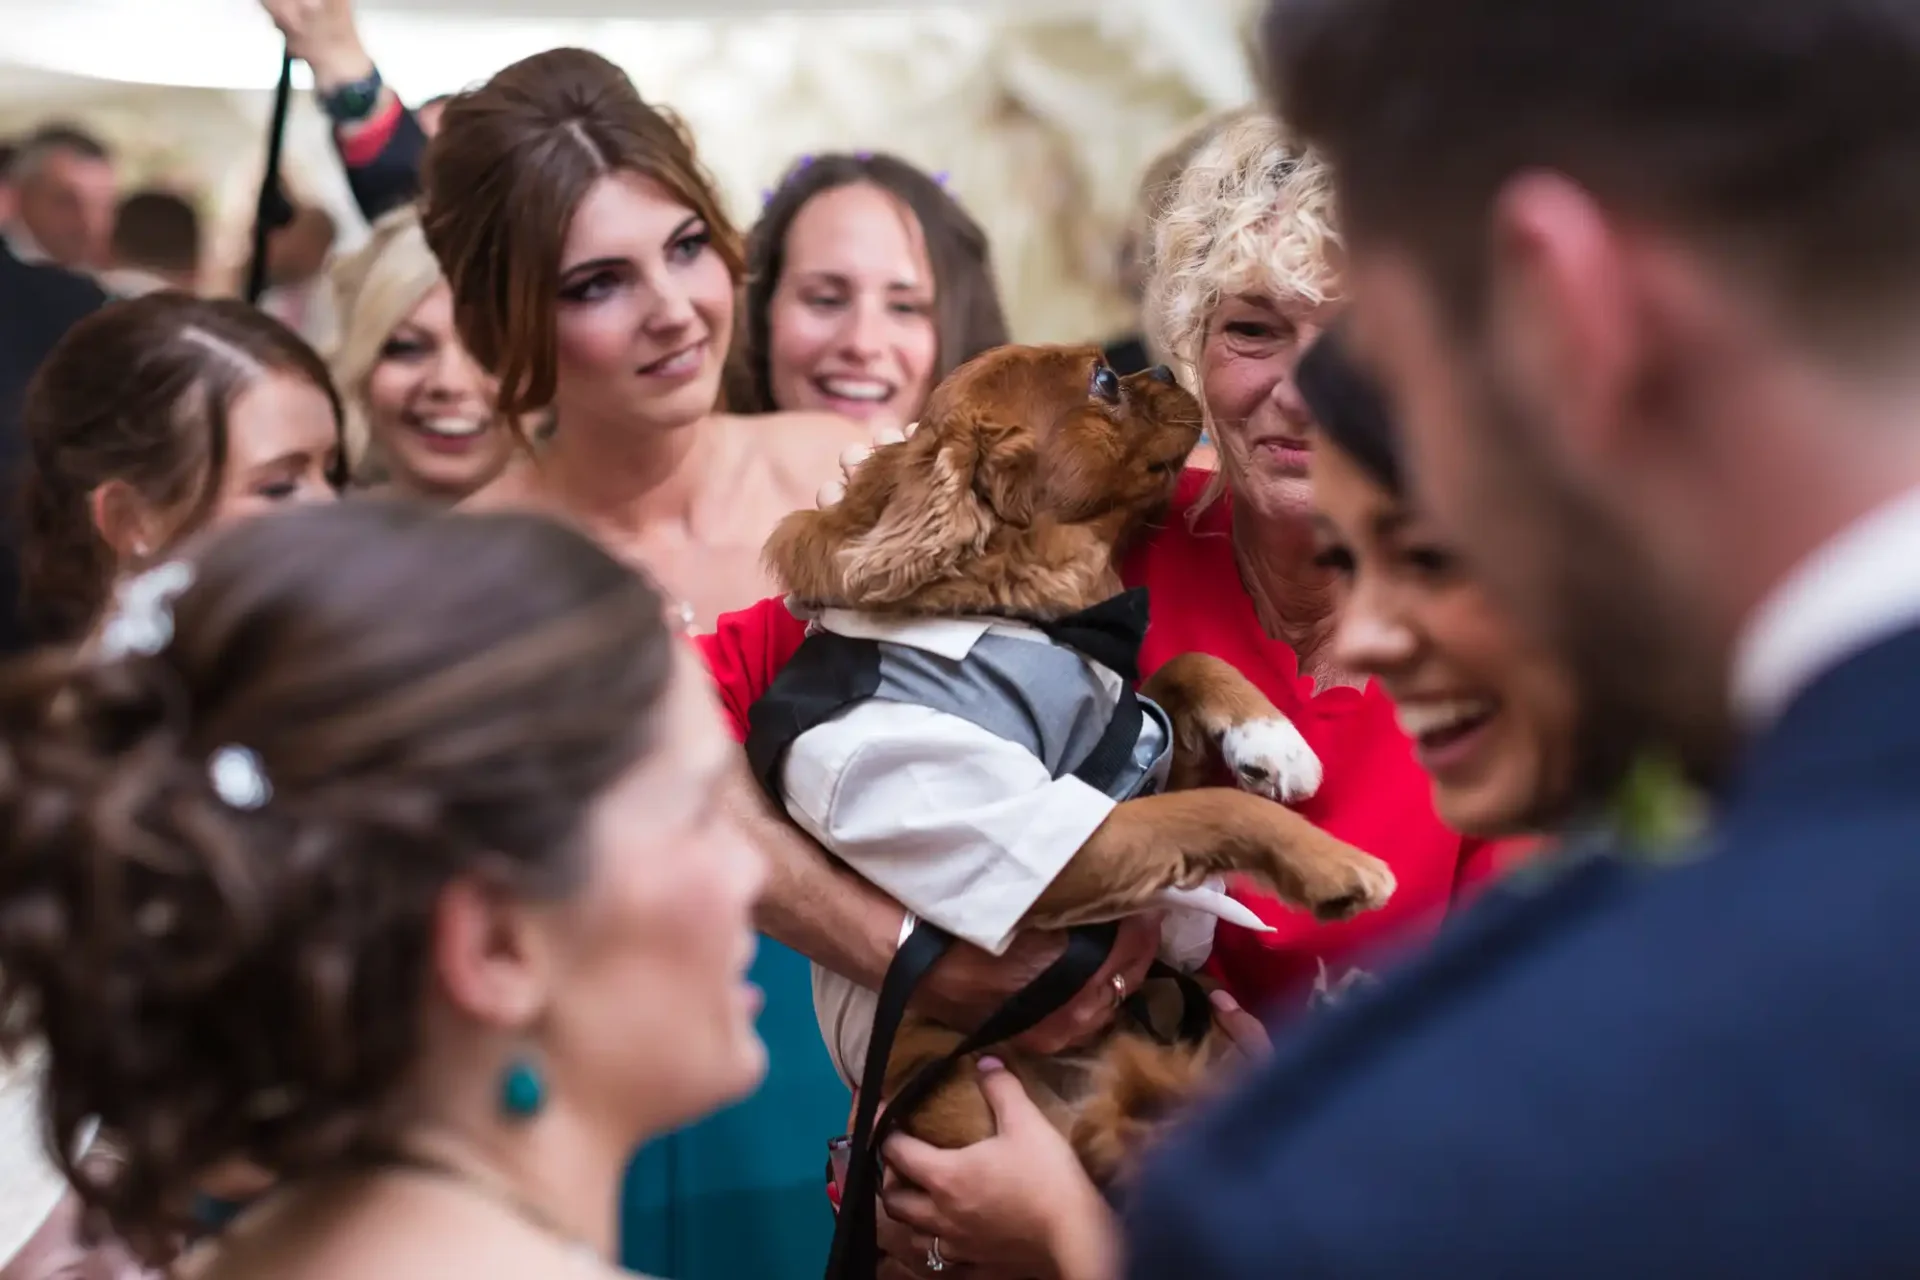 A joyful wedding scene with guests smiling and looking at a dog, dressed in a suit, being held up by a woman for a man to see.